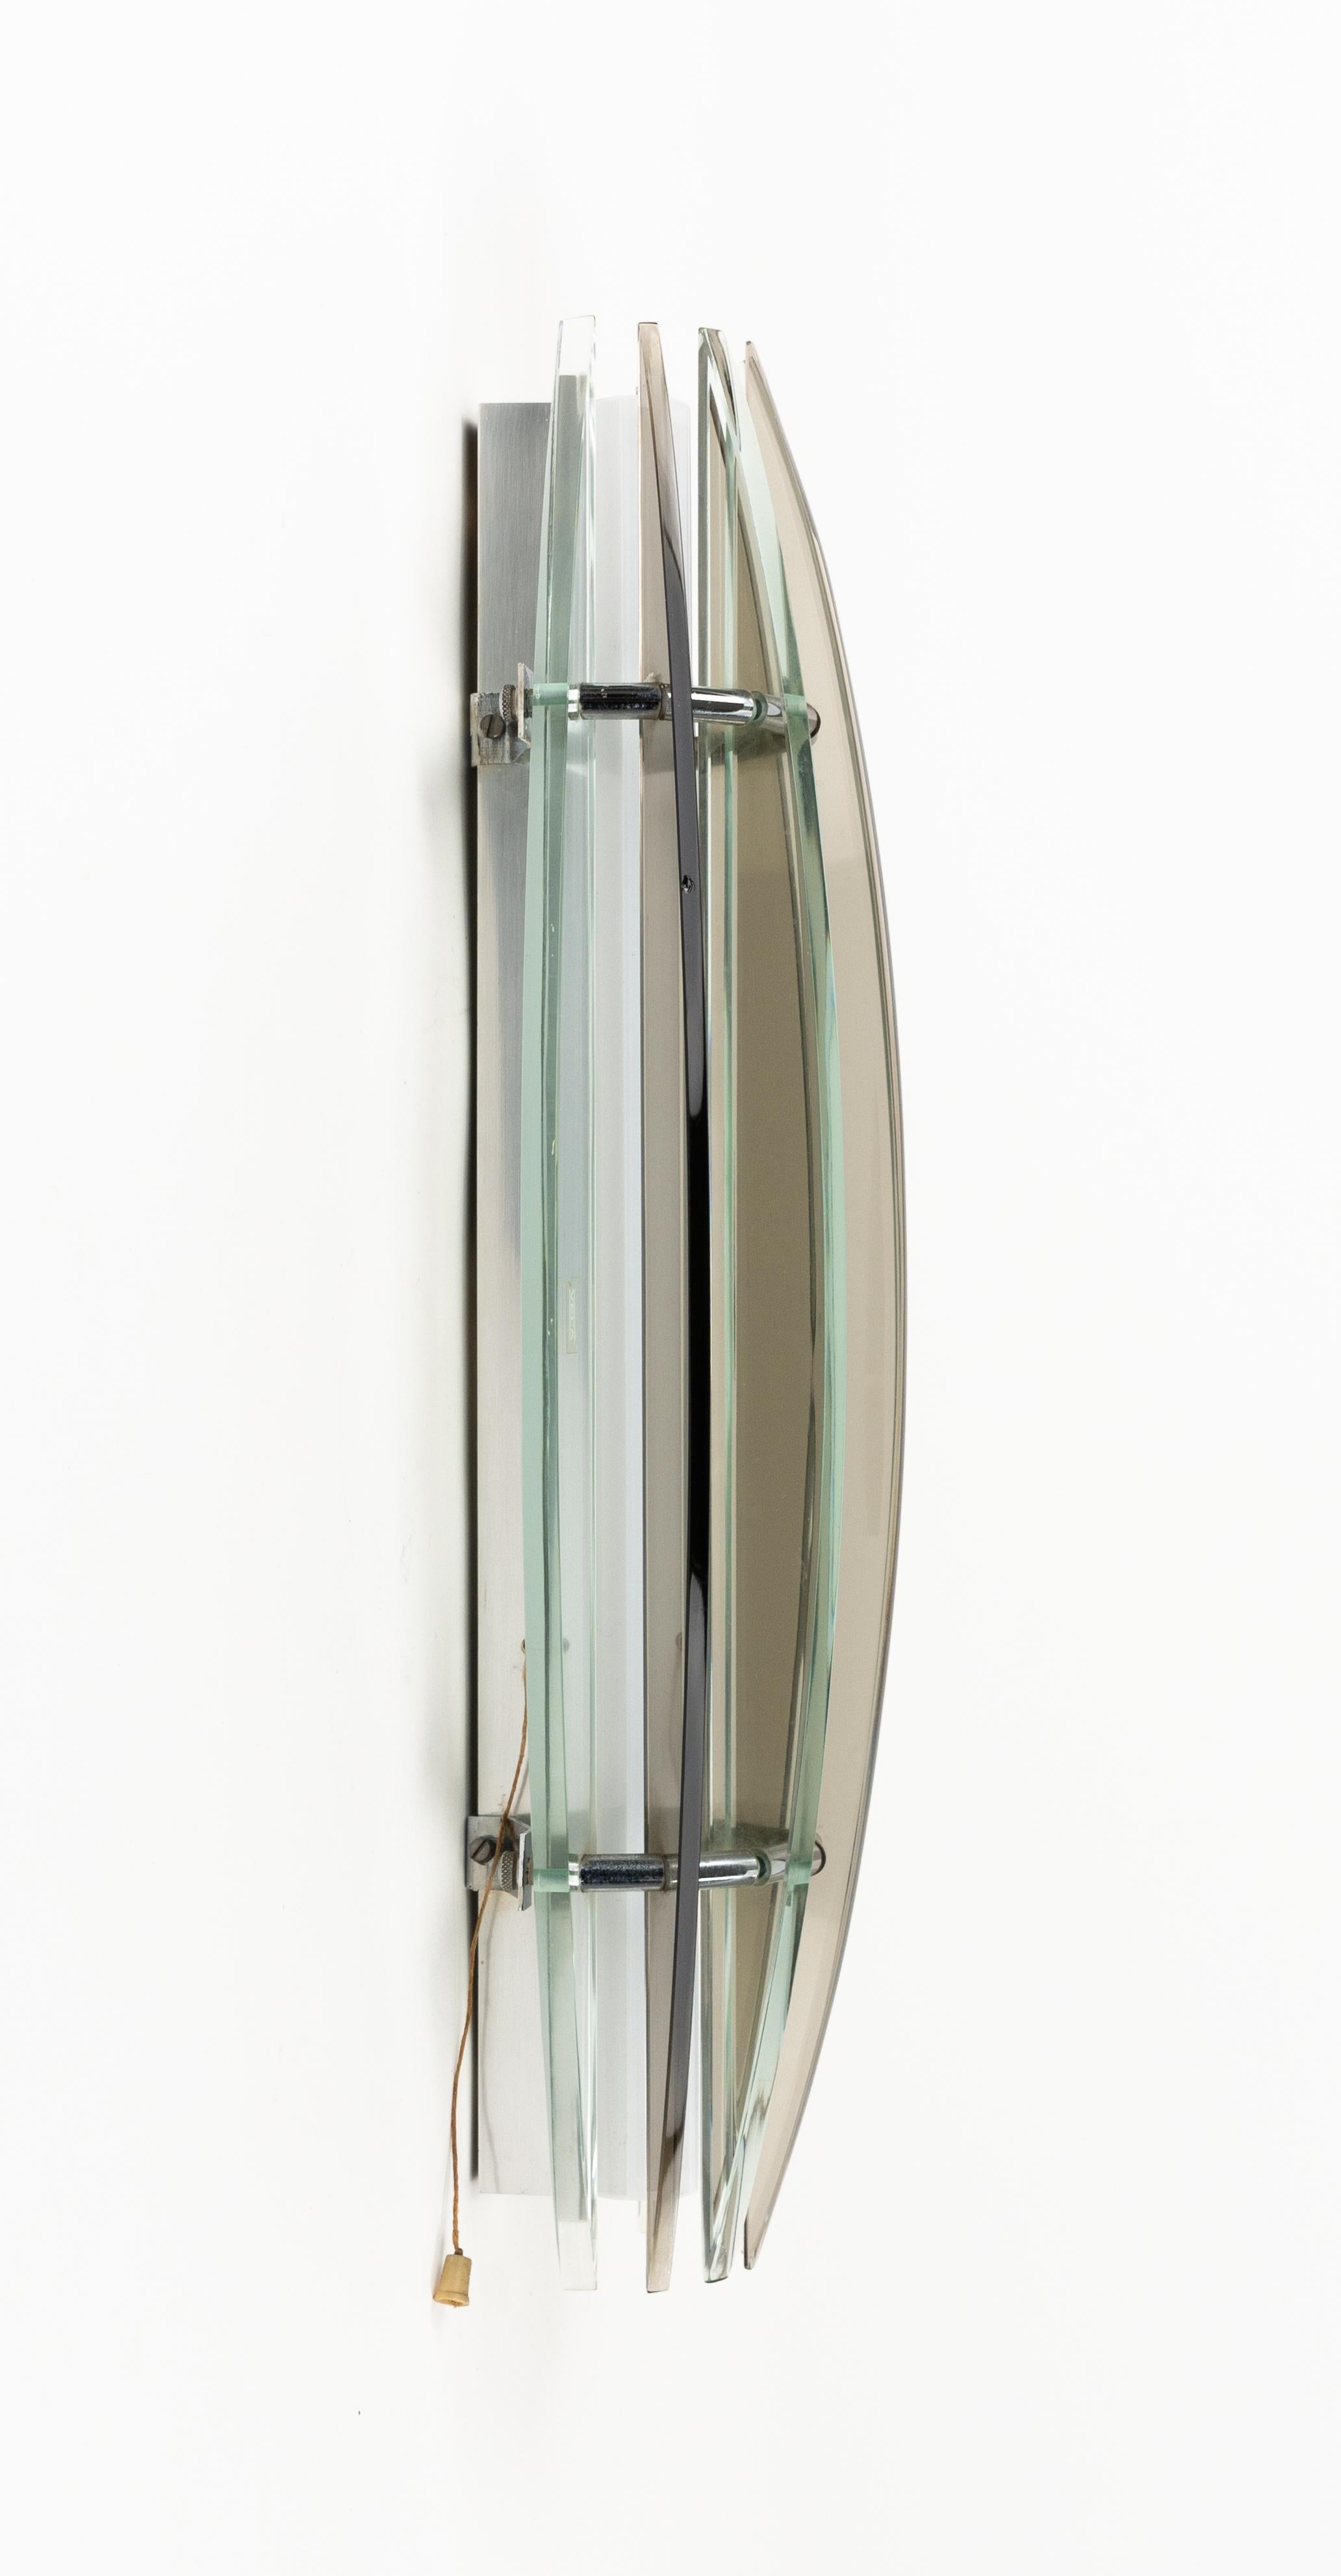 Midcentury Large Pair of Sconces in Colored Glass & Chrome by Veca, Italy, 1970s For Sale 4